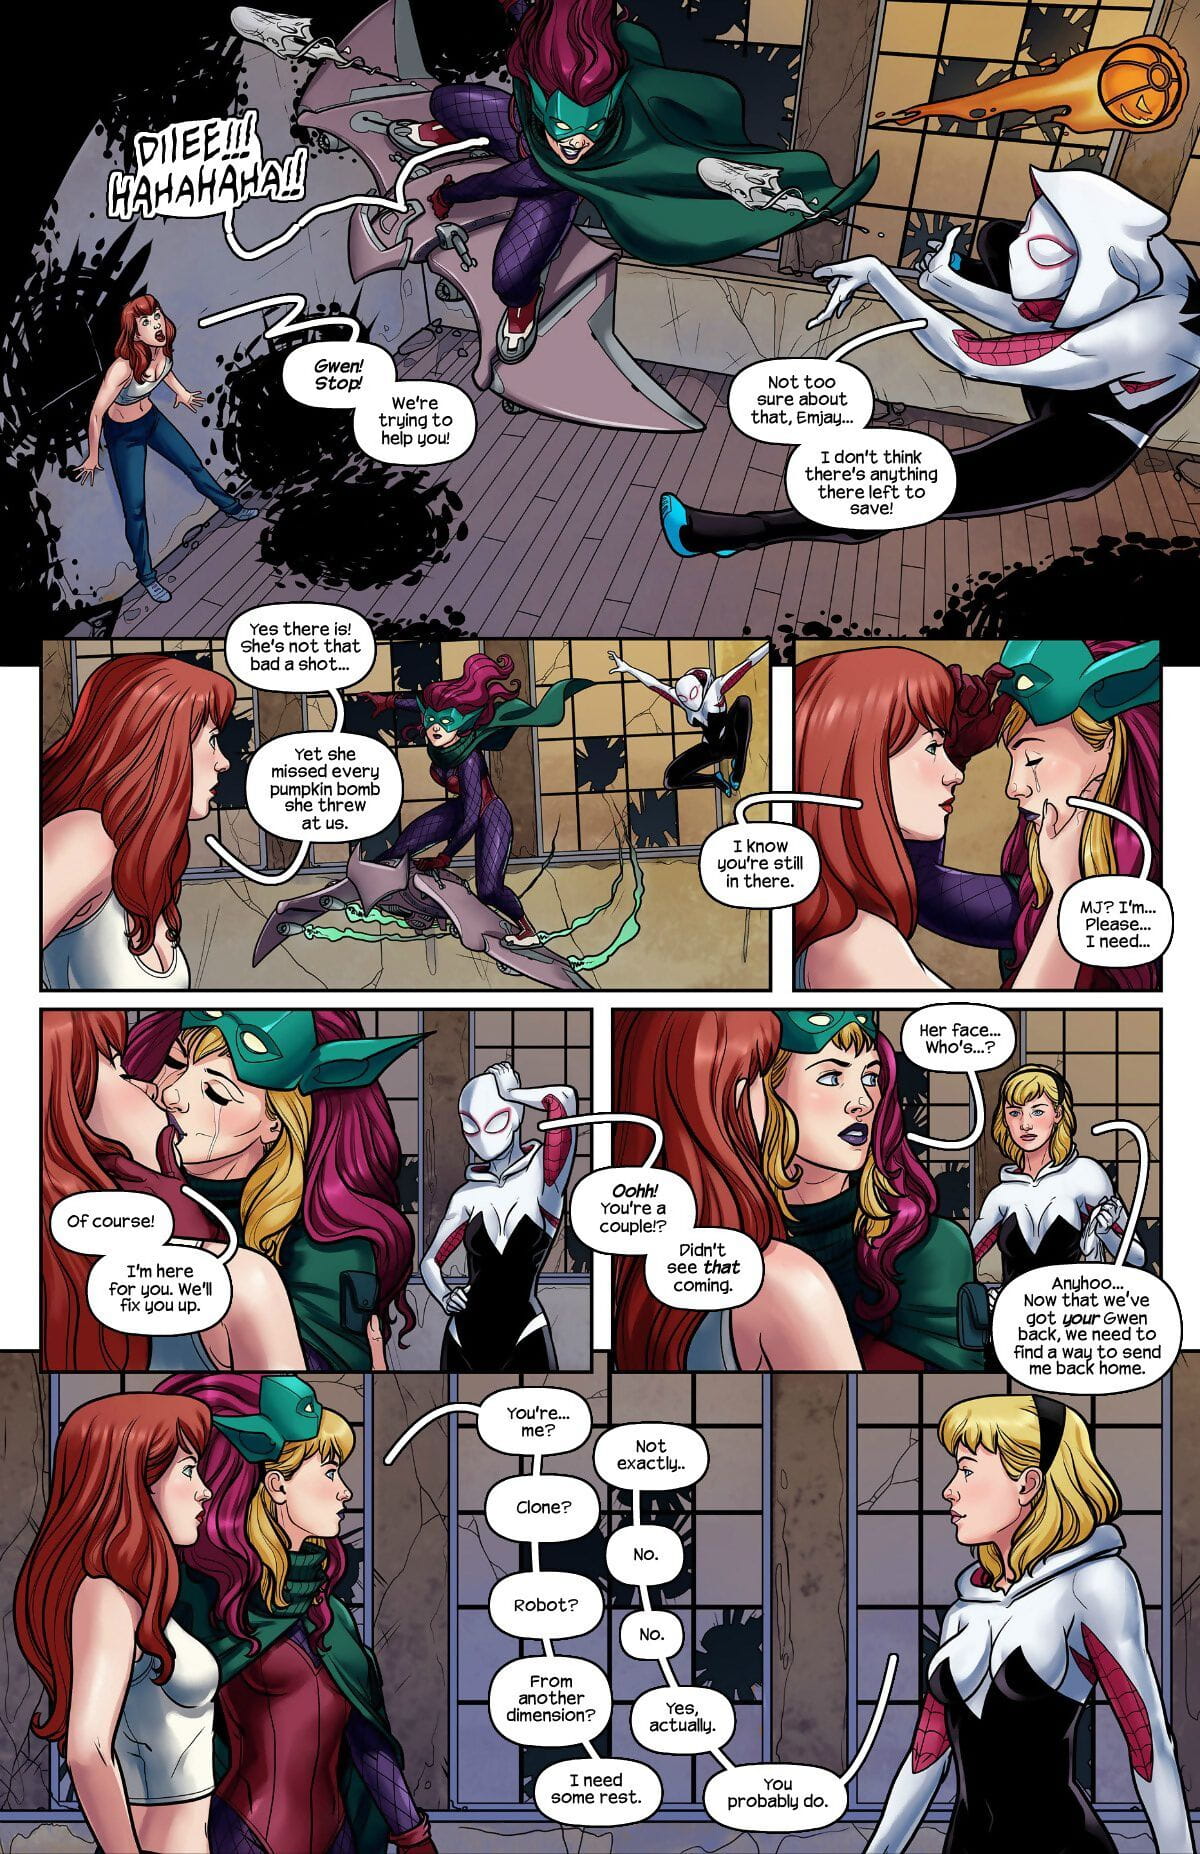 Tracy Scops- Ghost Spider VS. Green Goblin- page 1